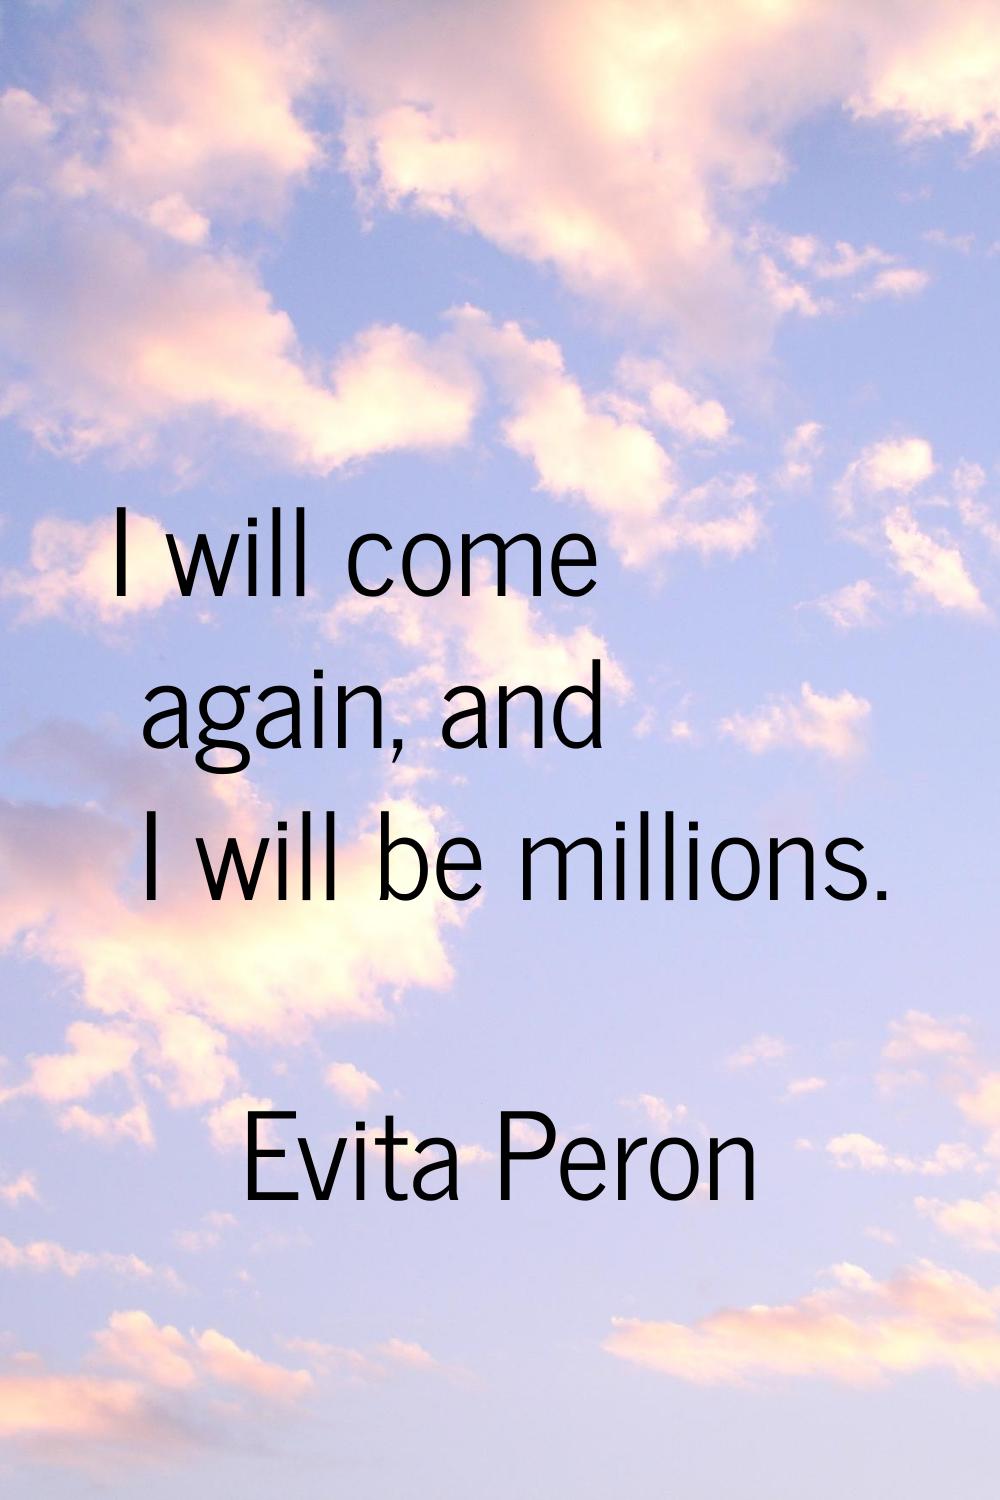 I will come again, and I will be millions.